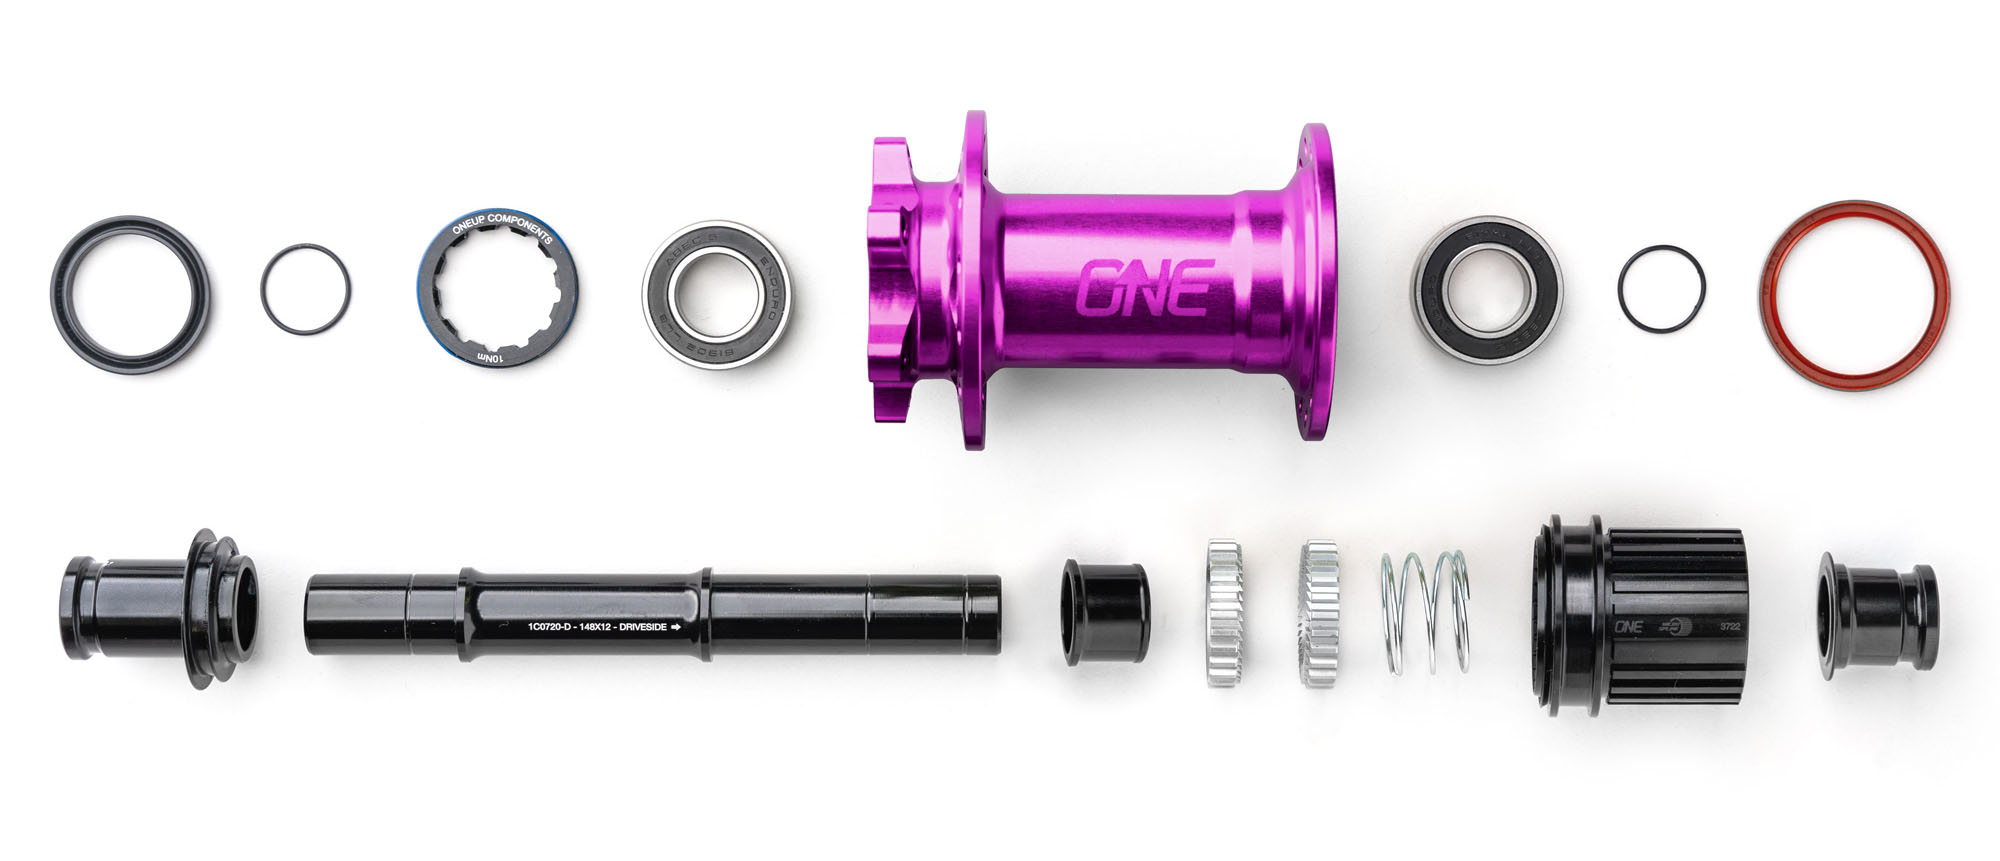 Zack Henderson reviews the OneUp Hubs